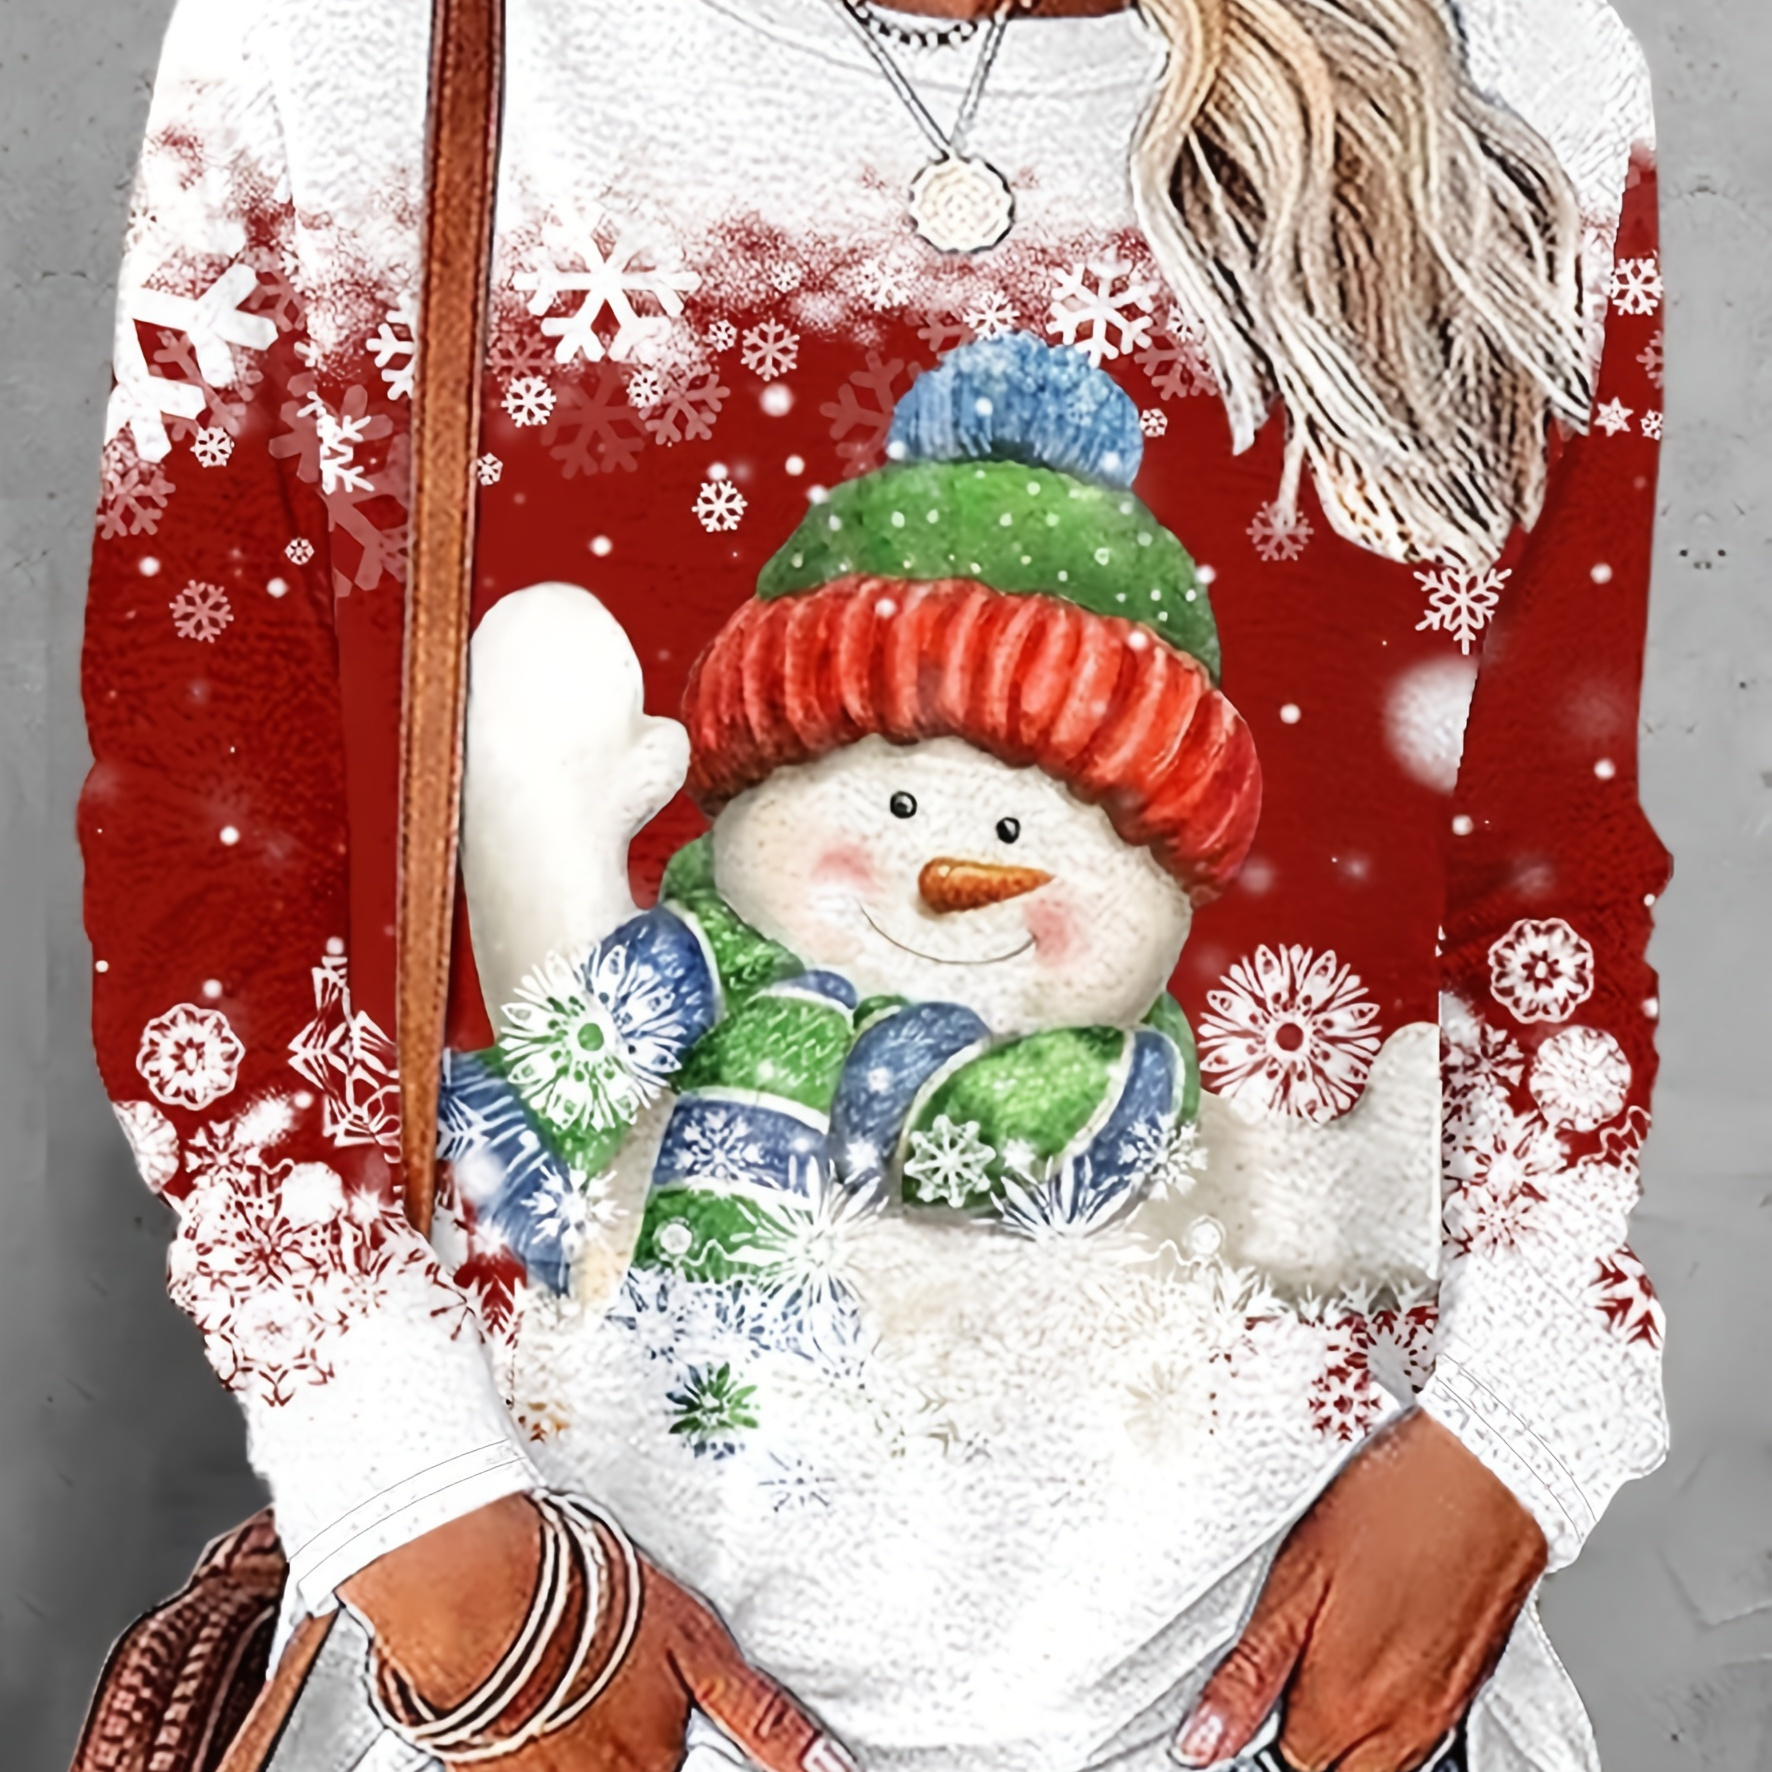 

Snowman & Snowflake Print T-shirt, Casual Crew Neck Long Sleeve Top For Spring & Fall, Women's Clothing